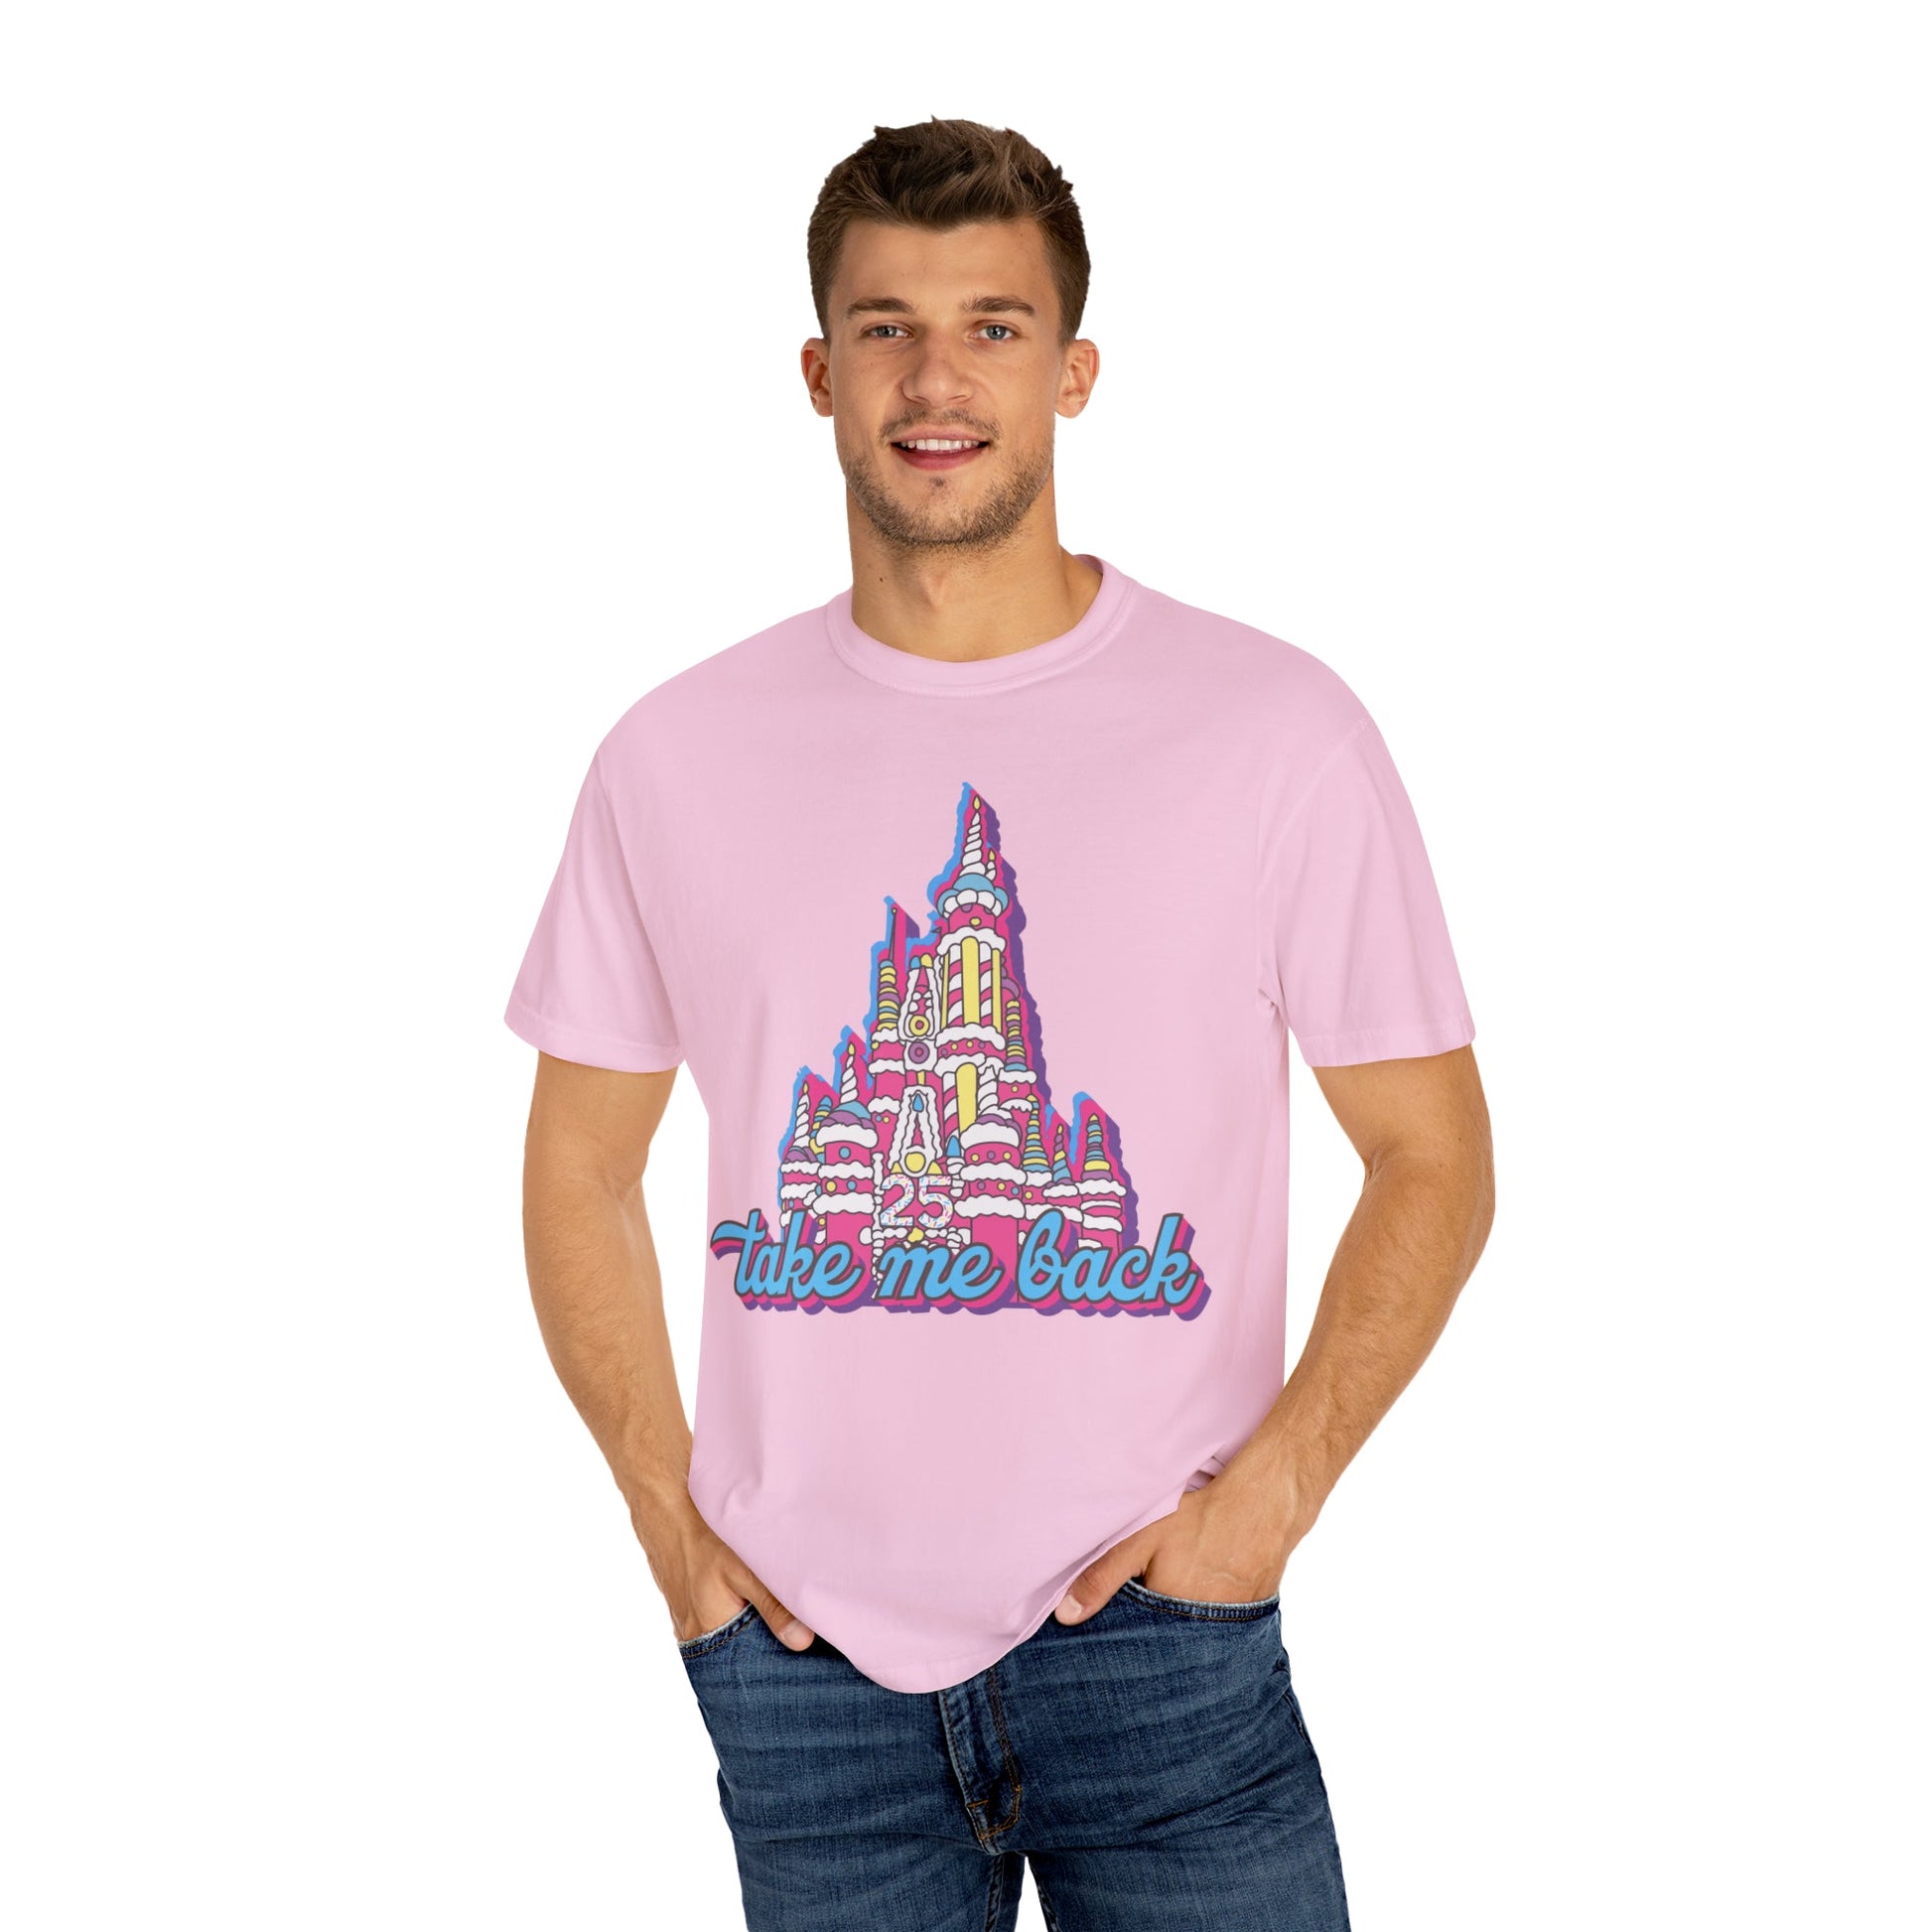 Take Me Back to the 90s Cake Castle Comfort Colors Tee - The Quirky Mouse